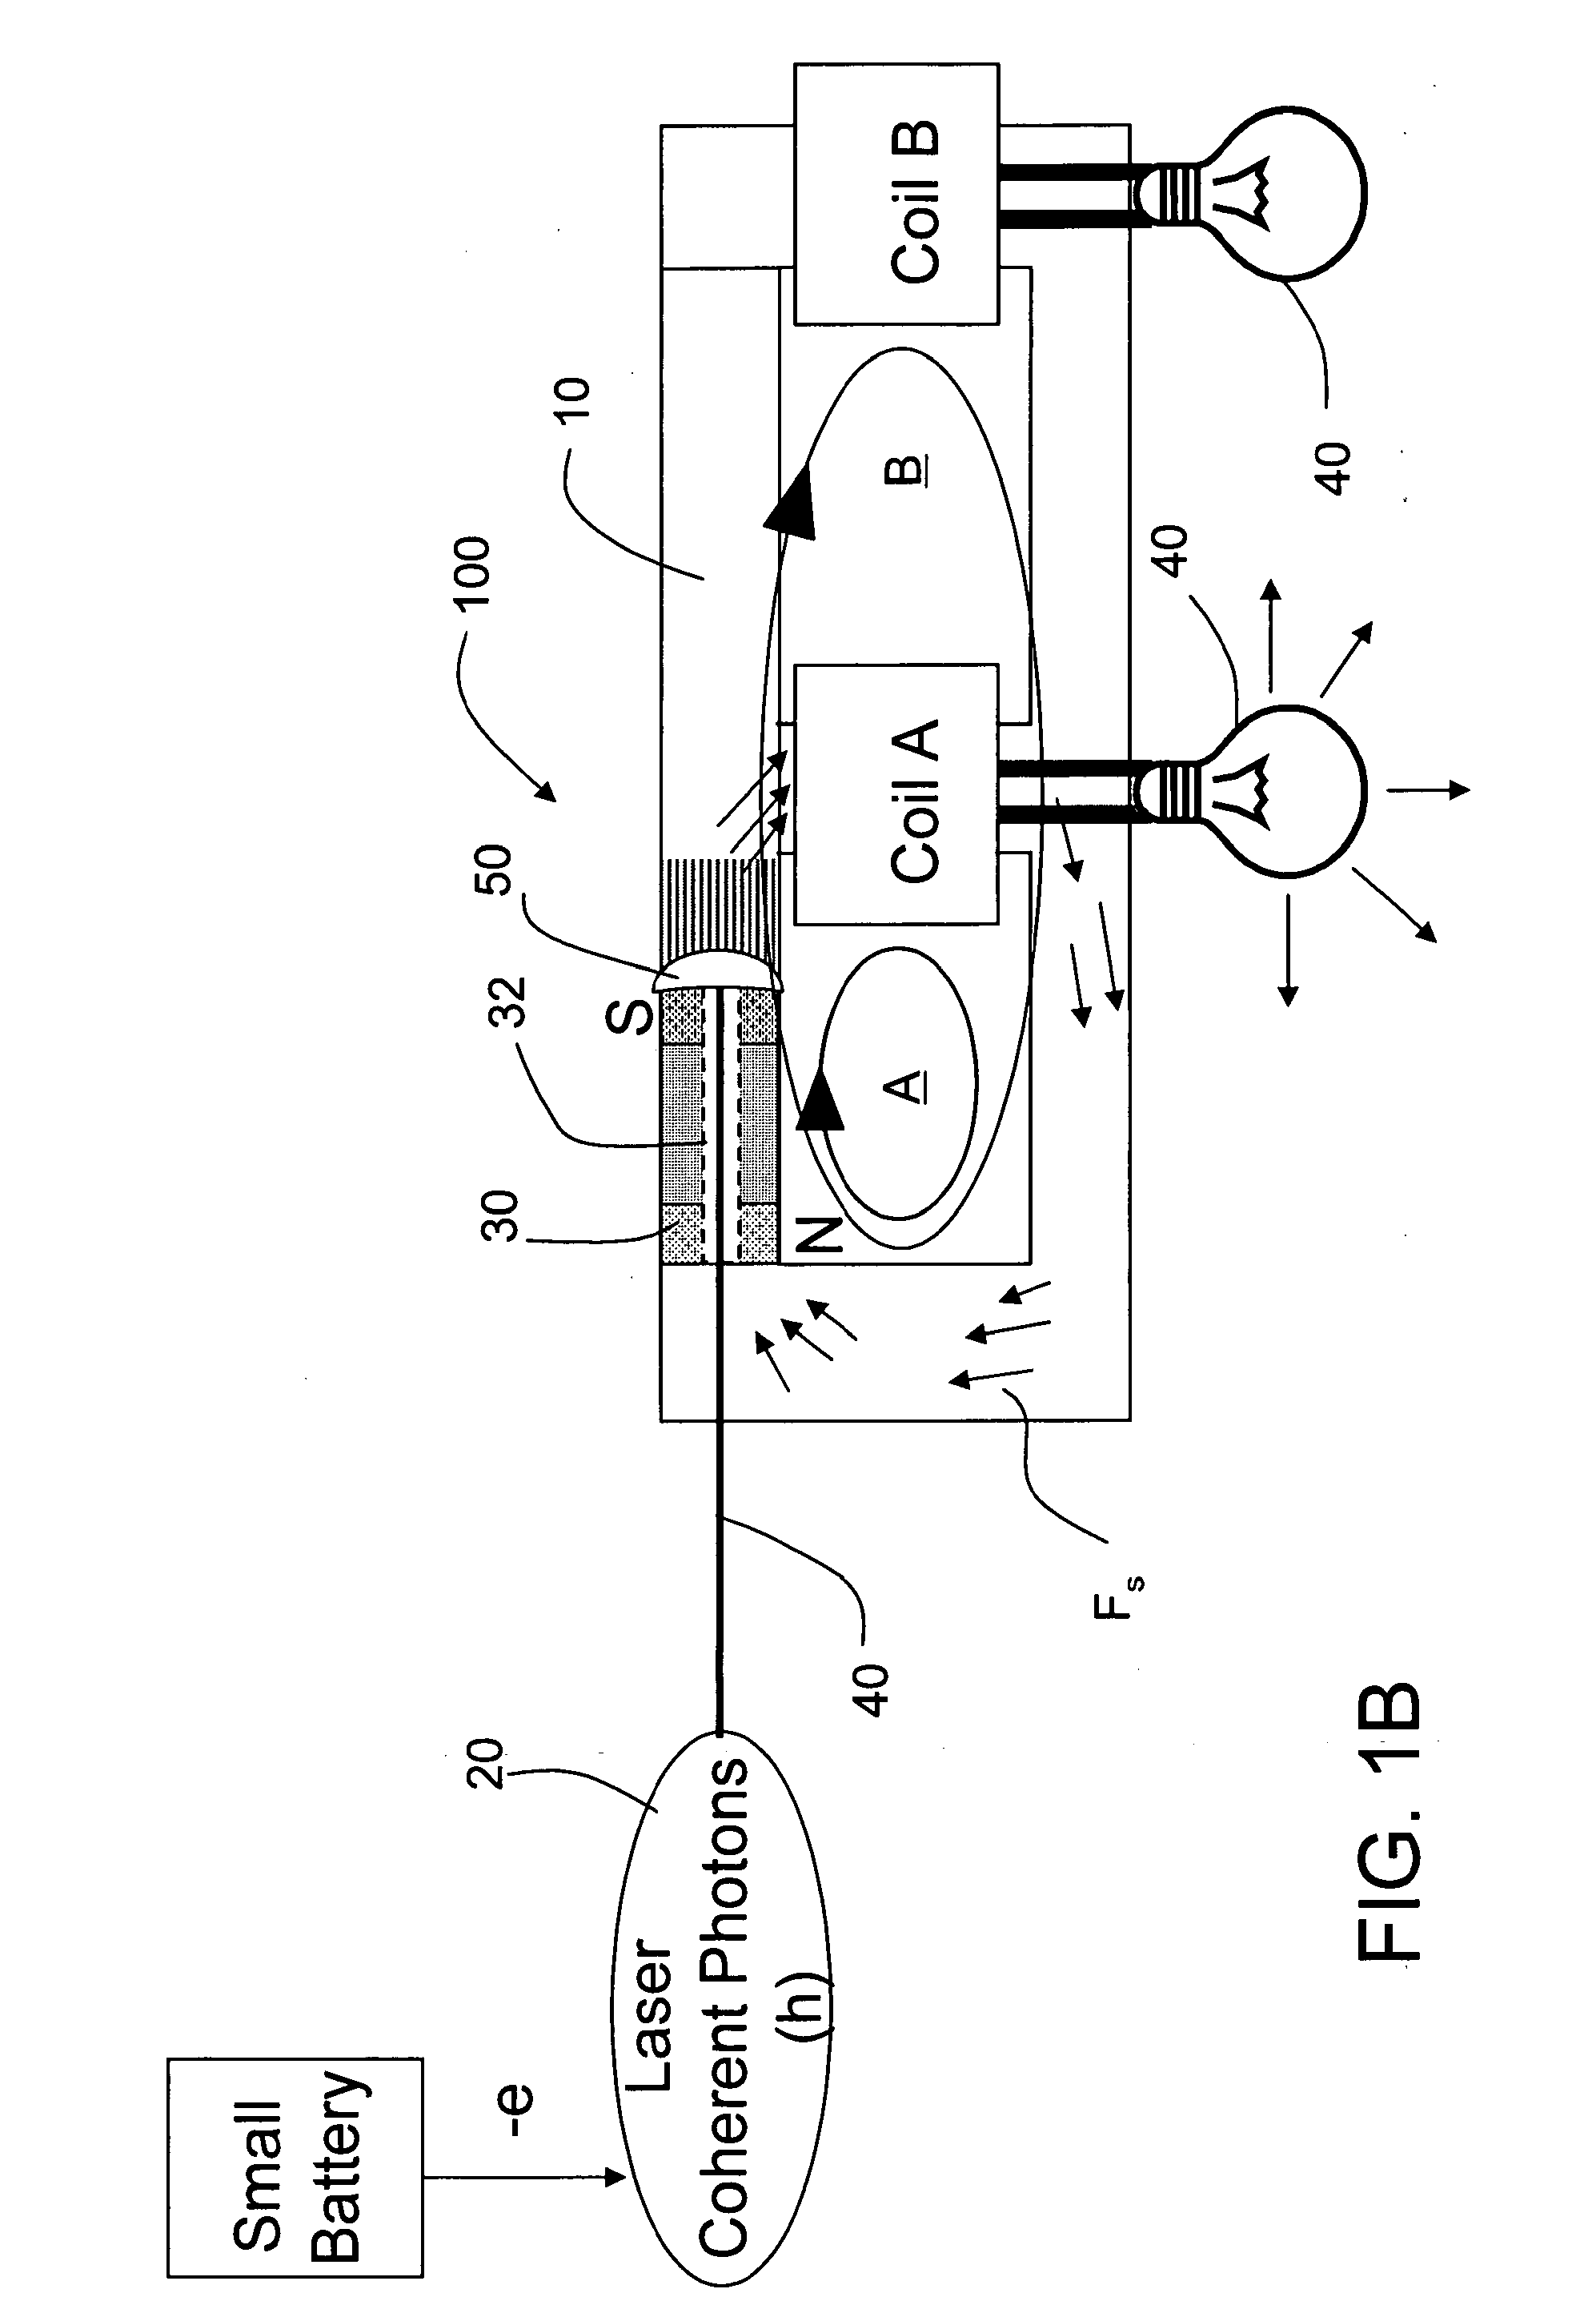 Method and Apparatus for Direct Energy Conversion